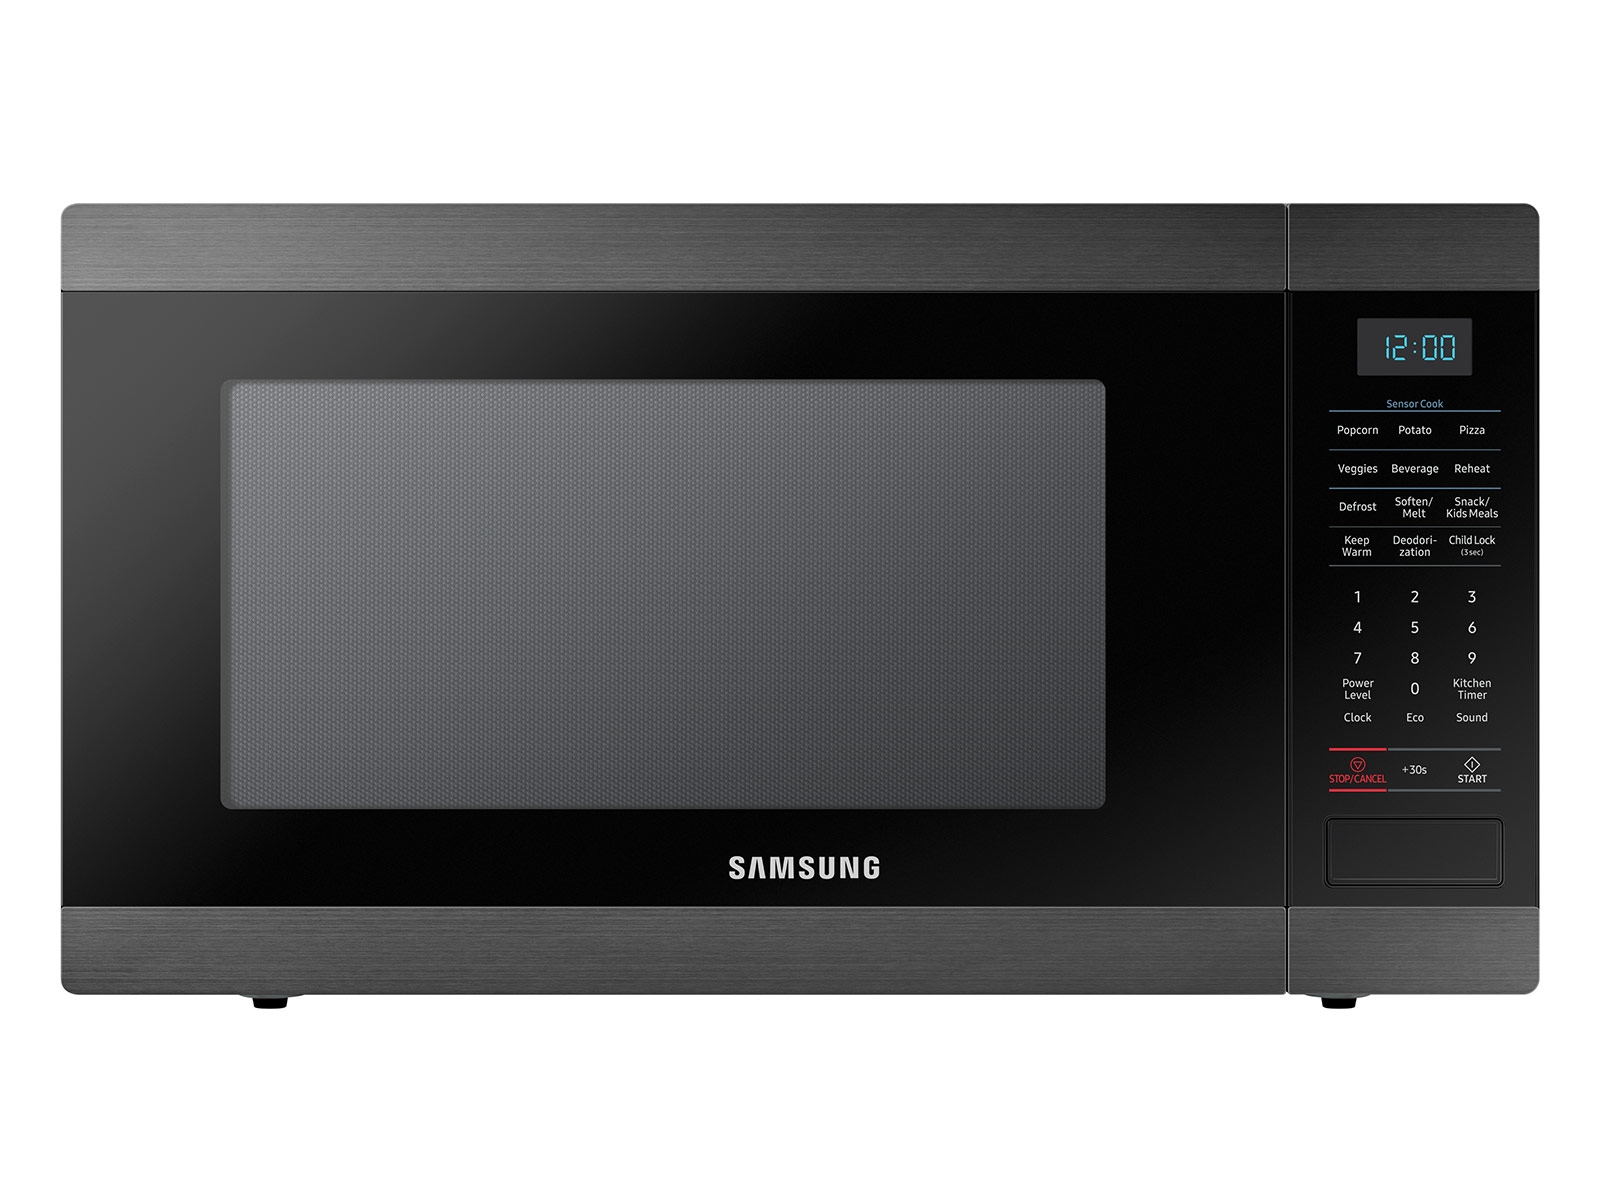 https://image-us.samsung.com/SamsungUS/home/home-appliances/microwaves/countertop/pdp/ms19m8000ag/gallery/020718/01_Microwave_MS19M8000AG_Front_Closed_Black.jpg